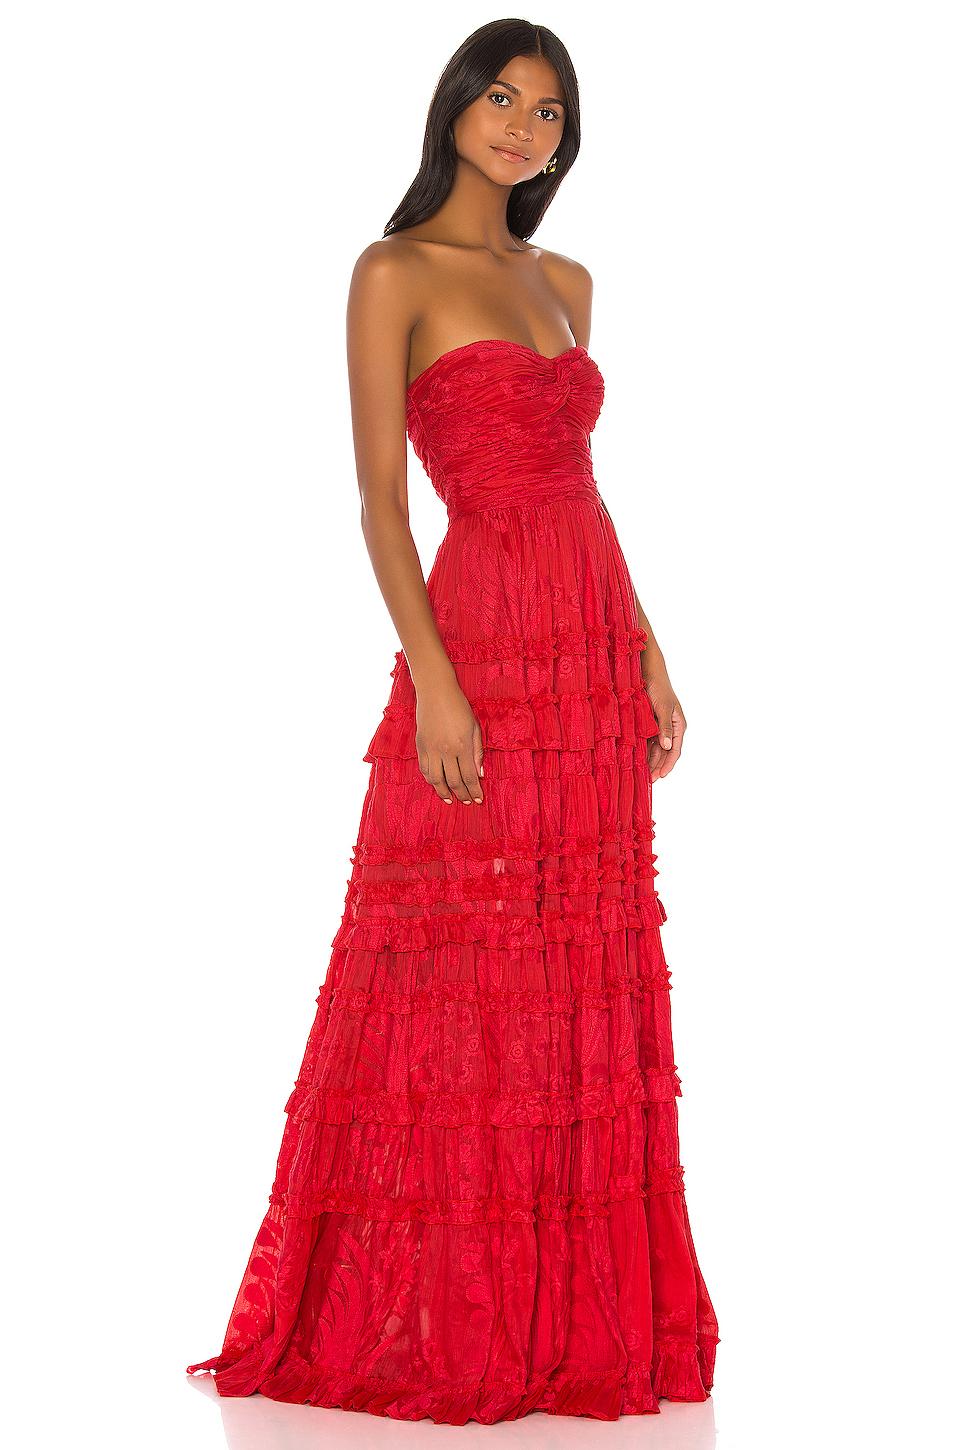 Alexis Linen Allora Gown in Red - Lyst